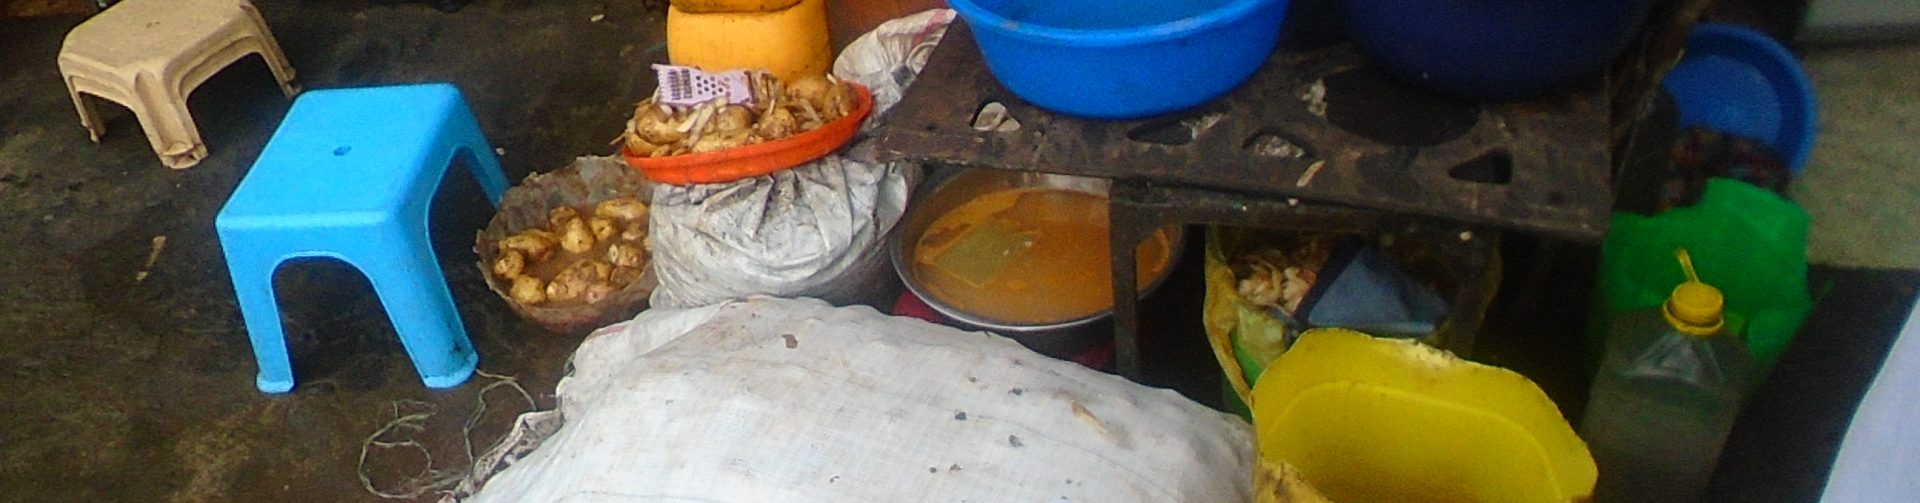 Issue Brief: Urban food environments through the lens of adolescents in Addis Ababa, Ethiopia